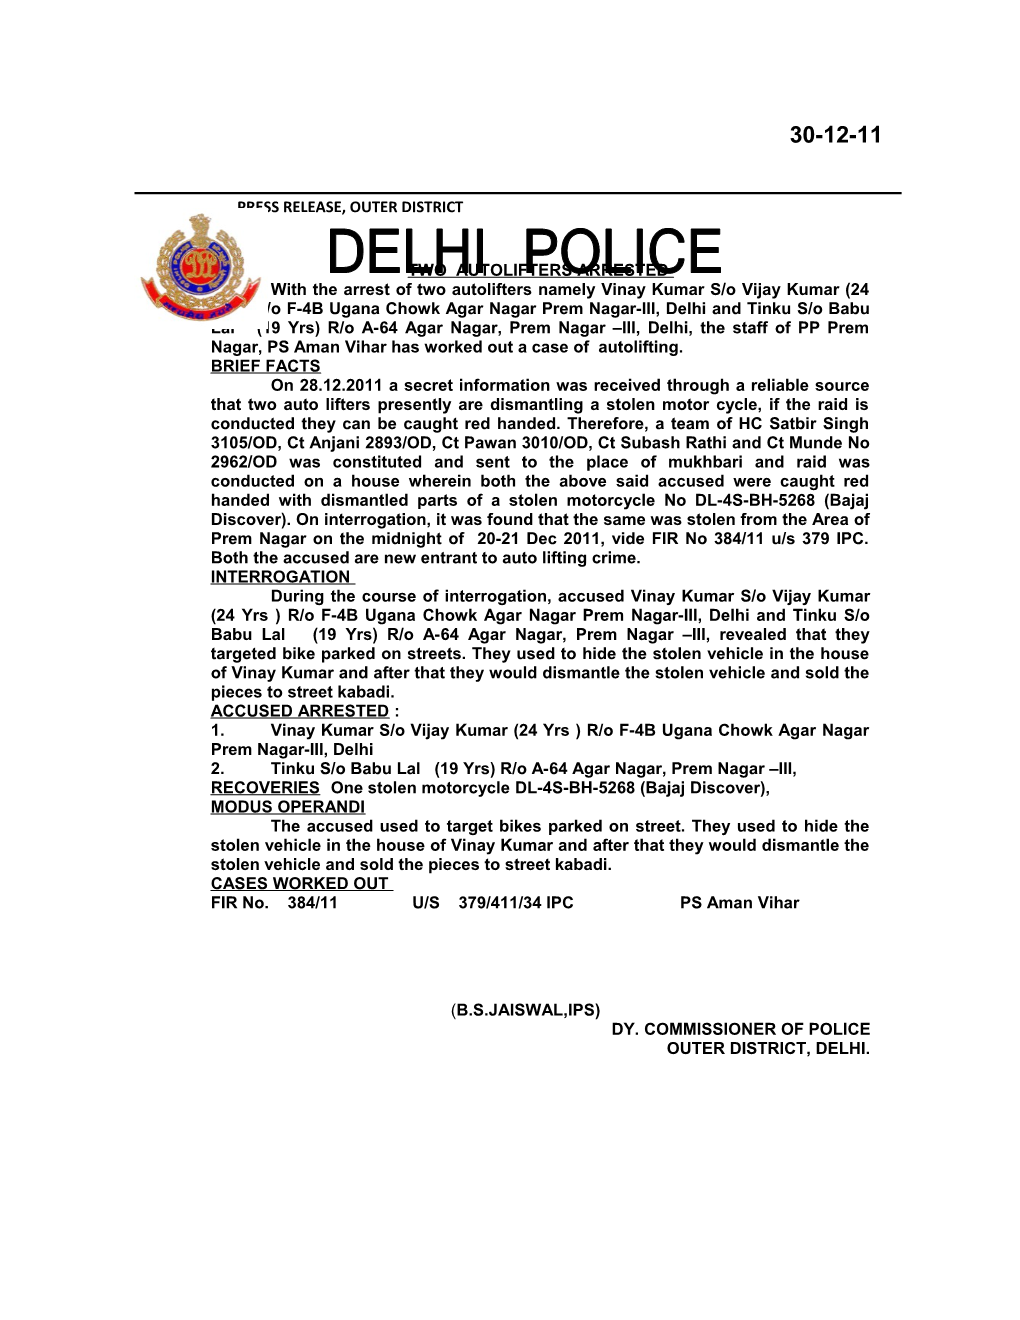 Press Release, Outer District